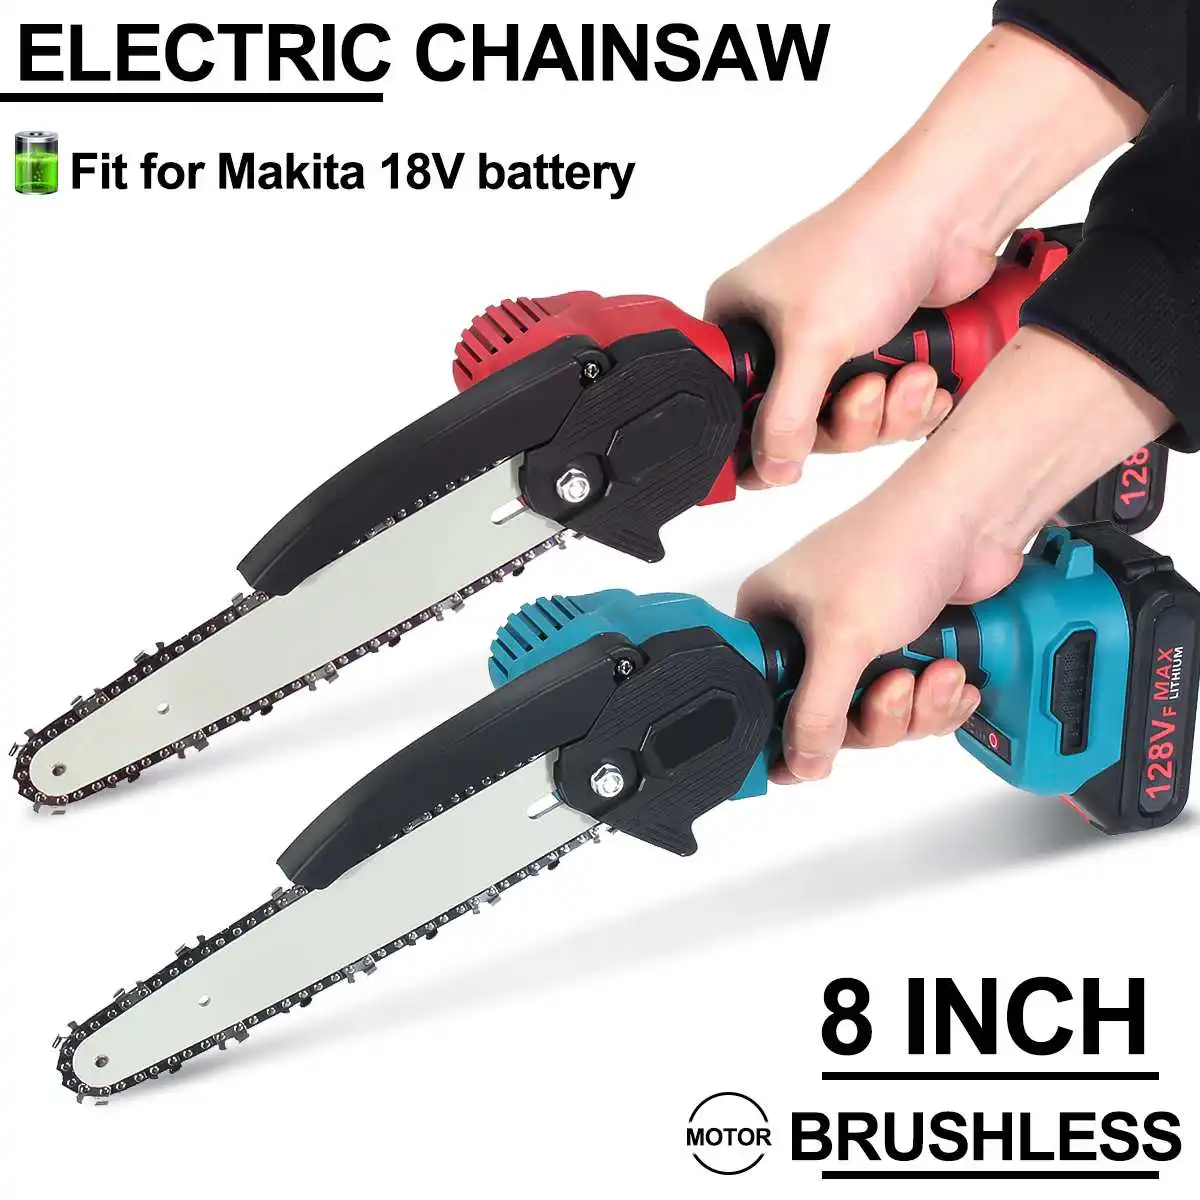 8 Inch Portable Electric Pruning Saw Mini Wood Spliting Chainsaw Brushless Motor One-handed Woodworking Tool for Garden Orchard